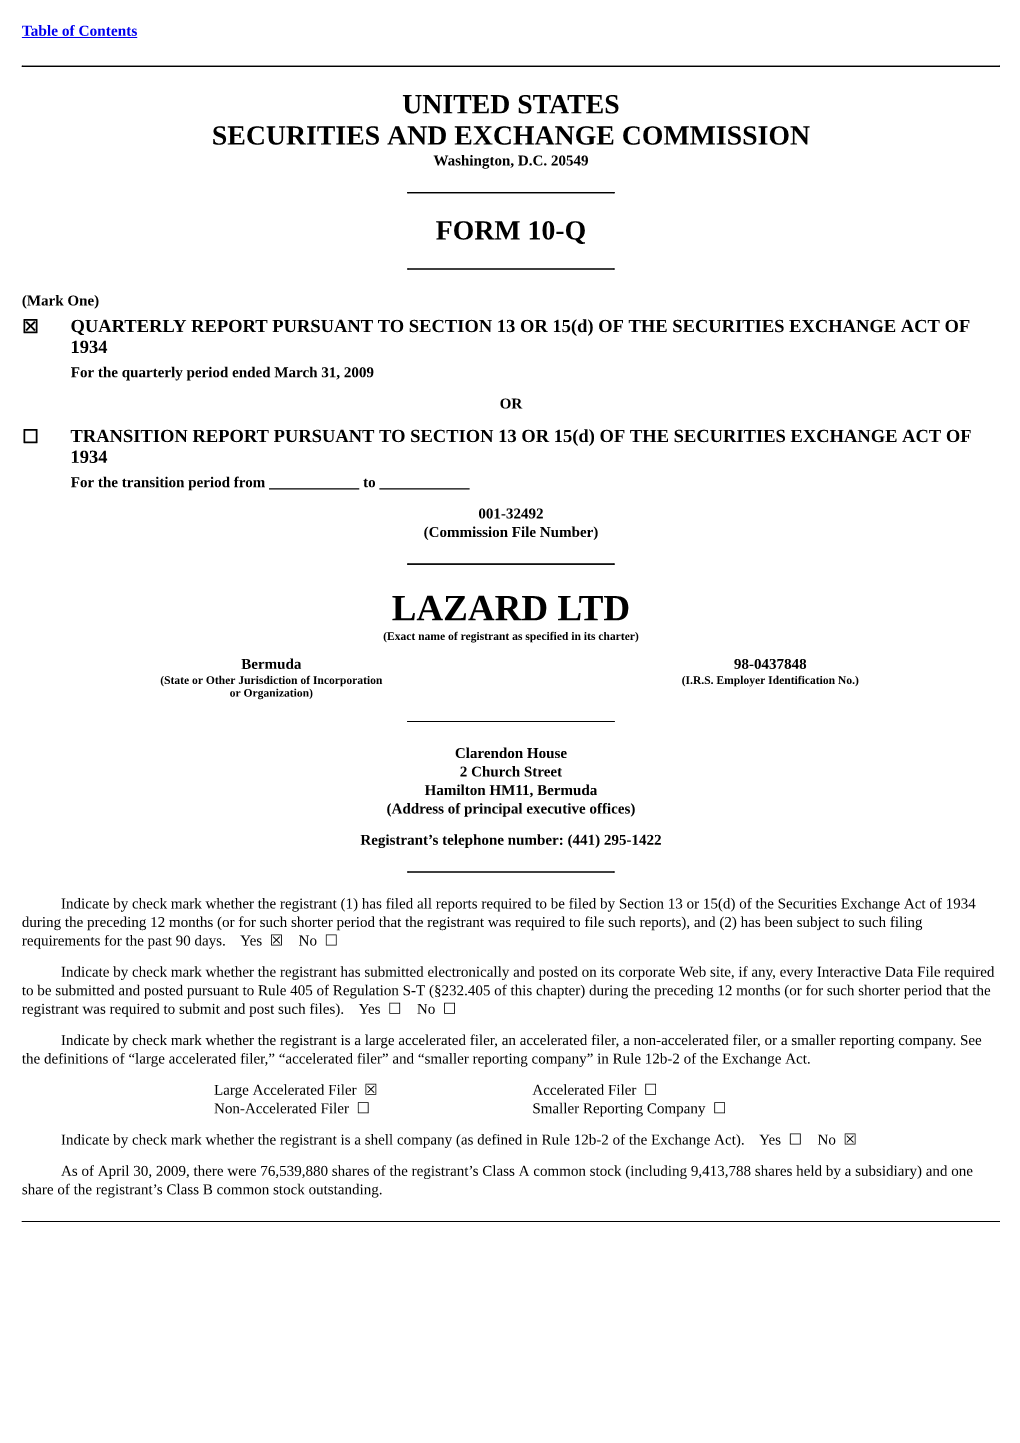 LAZARD LTD (Exact Name of Registrant As Specified in Its Charter)